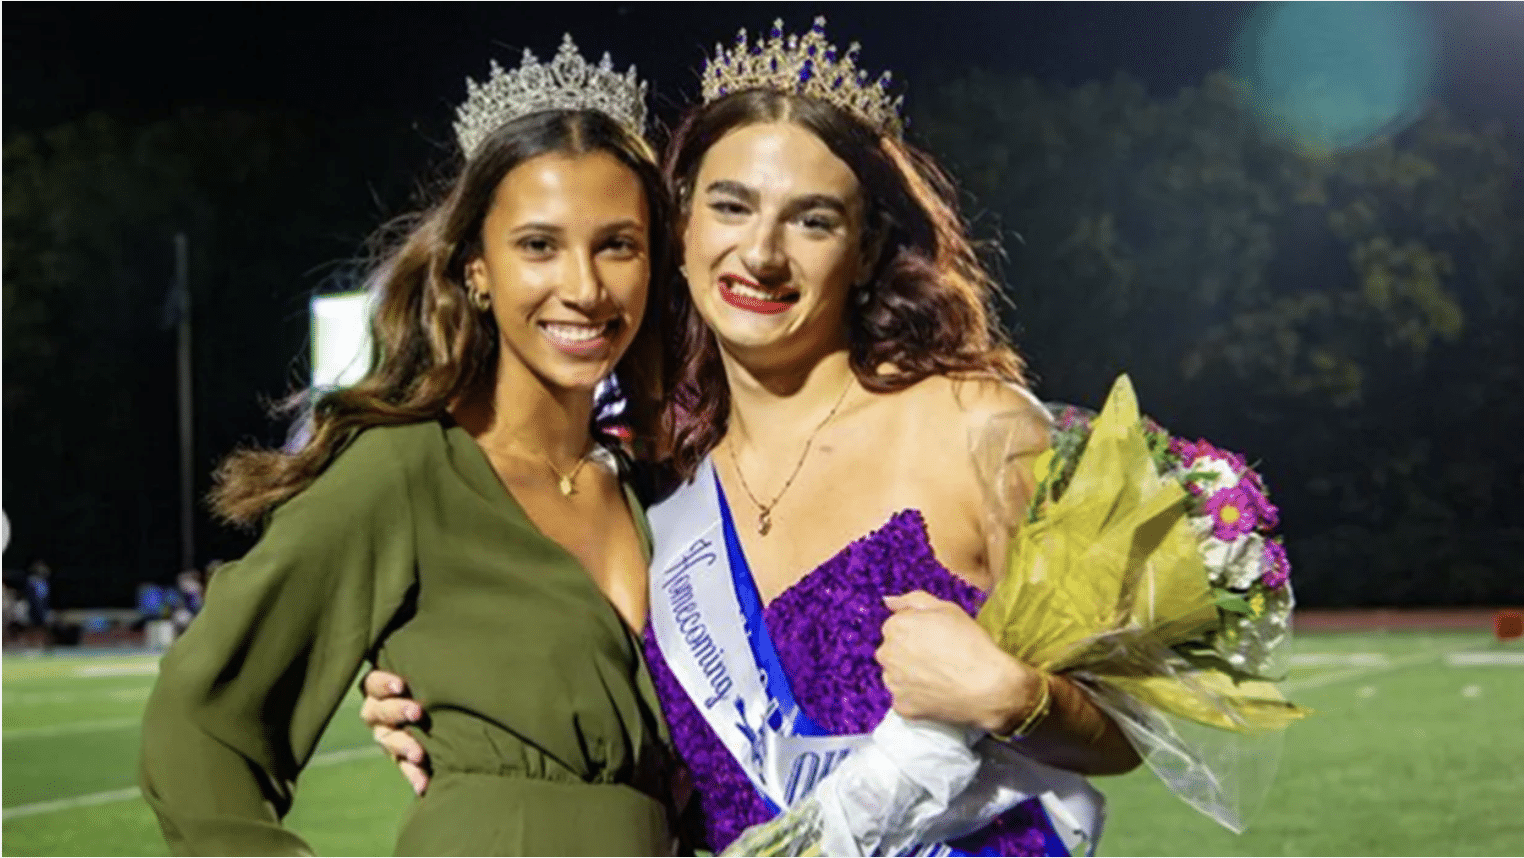 For the second time a school has crowned a male trans student as “homecoming queen”